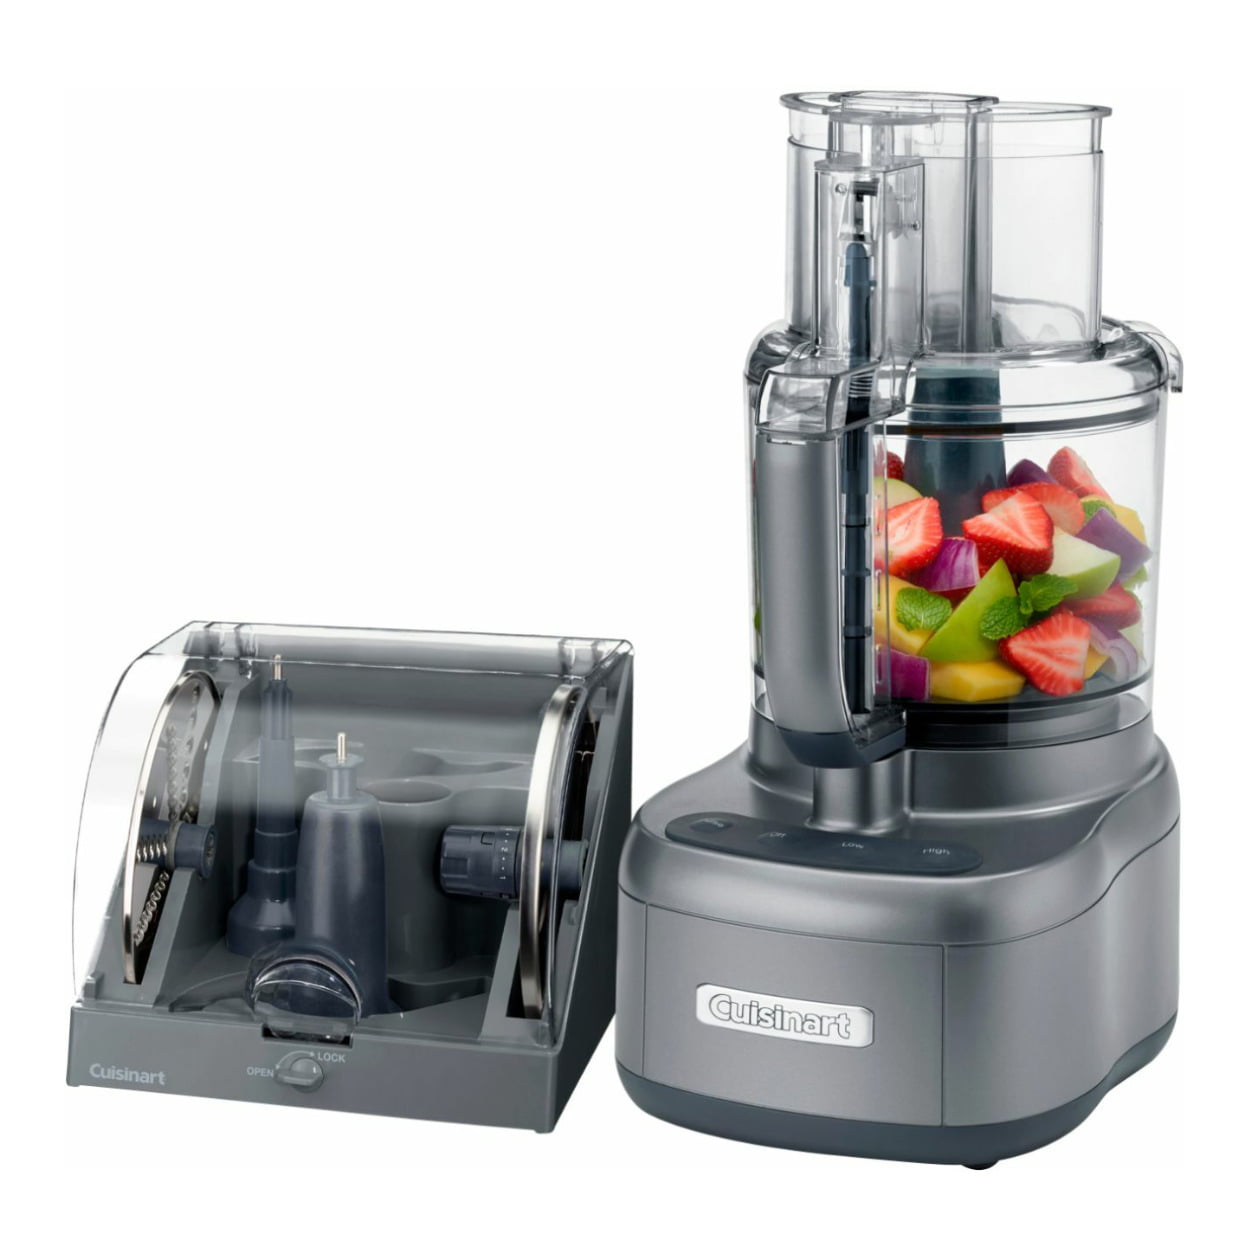 Cuisinart 11-Cup Food Processor with Storage Case (Silver